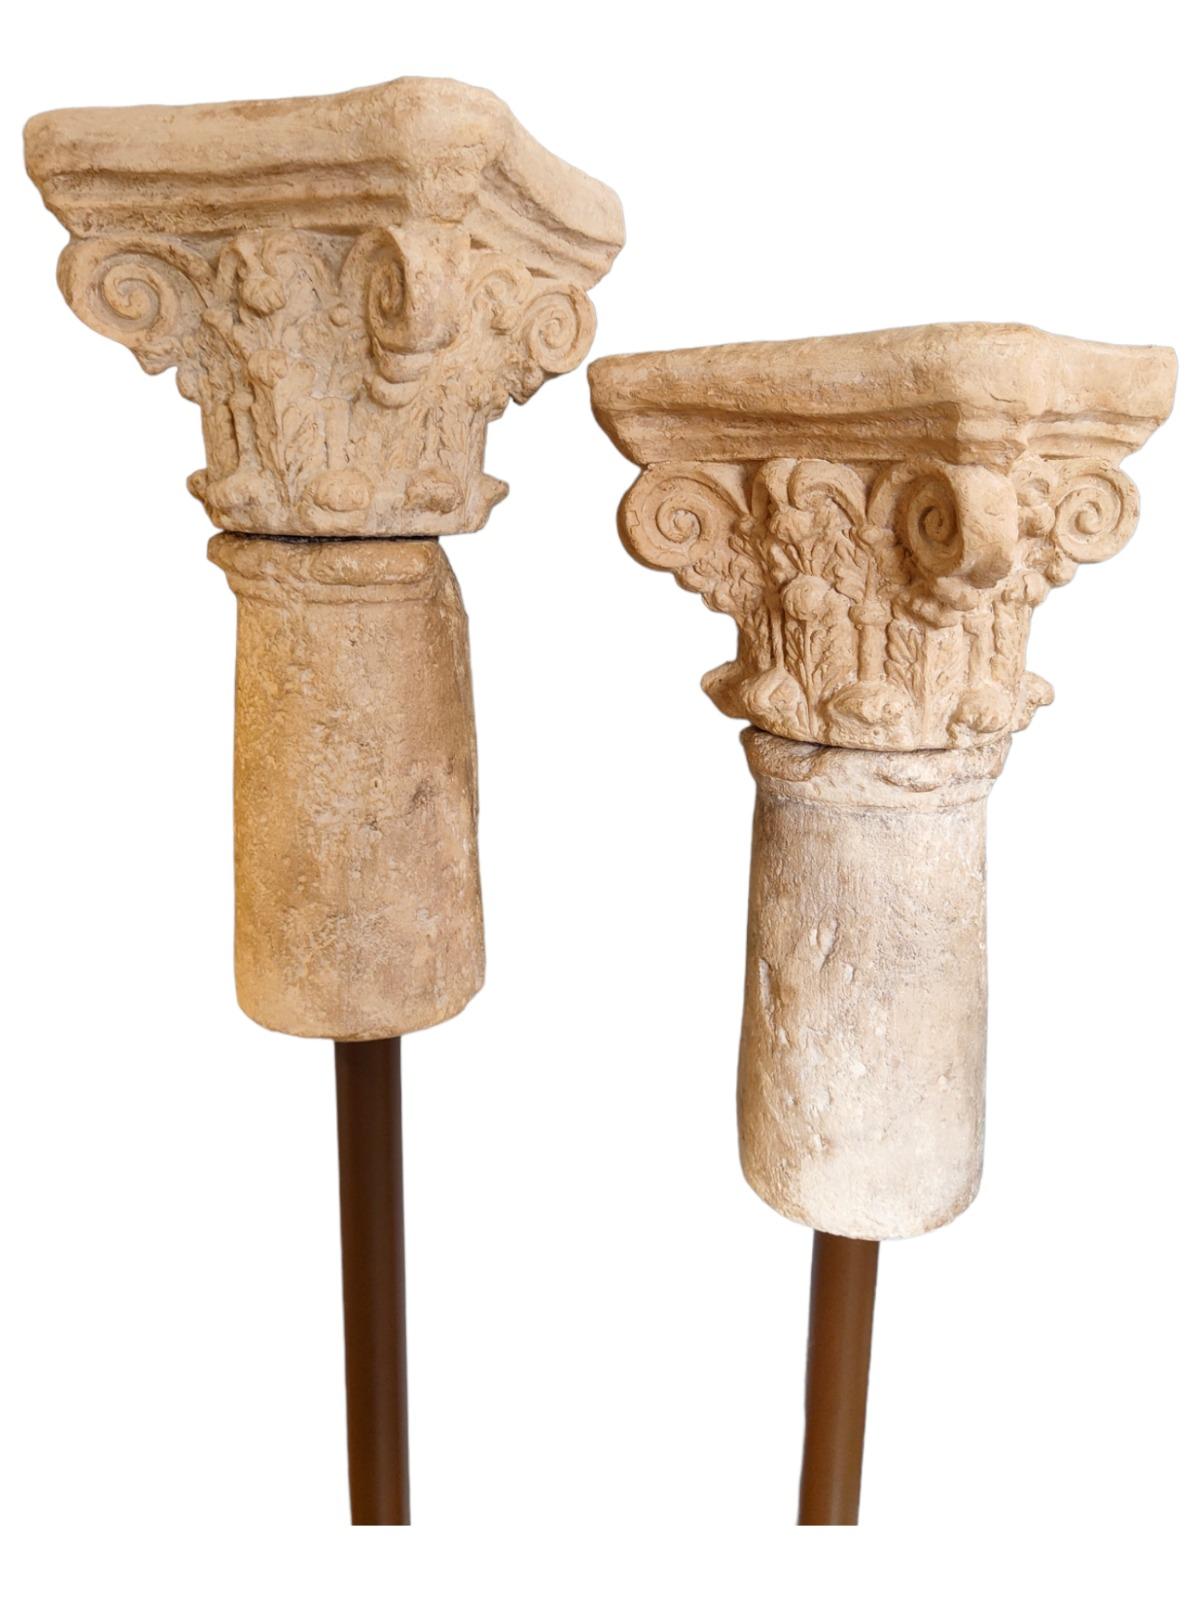 TWENTIETH CENTURY TERRACOTTA COLUMNS.
PAIR OF TERRACOTTA OR SIMILAR COLUMNS FROM THE 20TH CENTURY. VERY DECORATIVE. MEASURES. 70X30X30 WITHOUT SUPPORT.
Good condition.